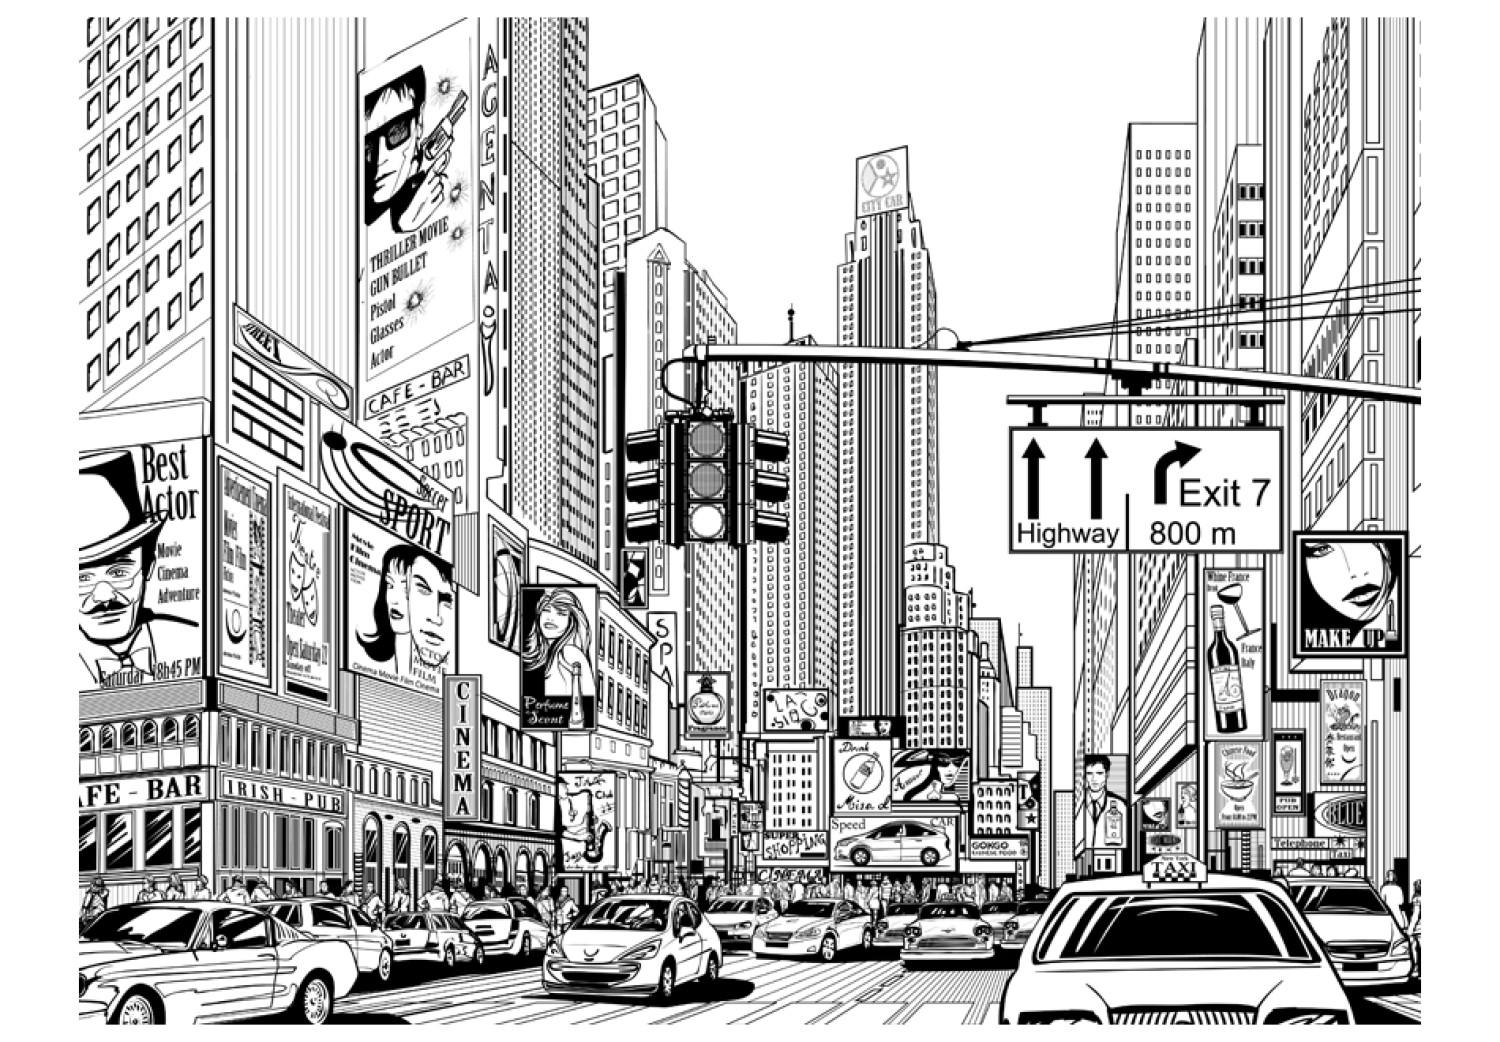 Wall Mural On the Streets of New York City, USA - black and white urban architecture